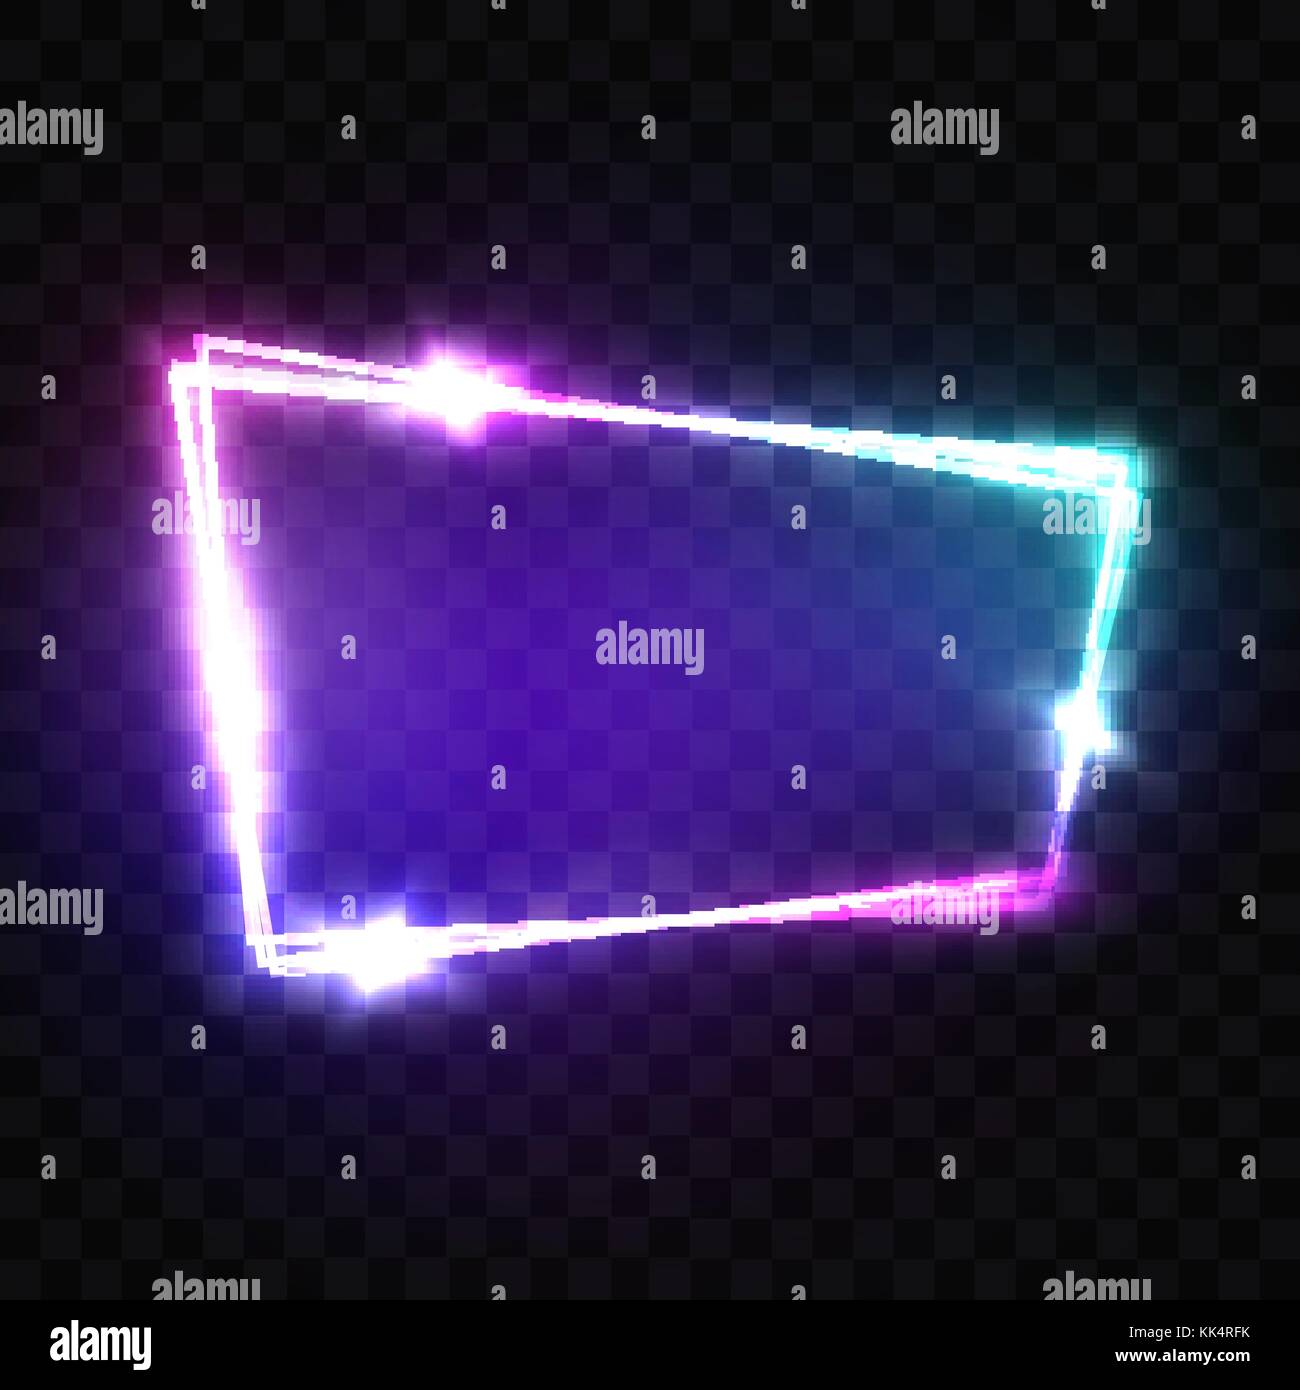 Blank 3d Retro Light Signboard With Shining Neon Effect. Night Club Neon Sign. Techno Frame With Glowing On Transparent Backdrop. Electric Street Banner. Technology Vector Illustration in 80s Style Stock Vector